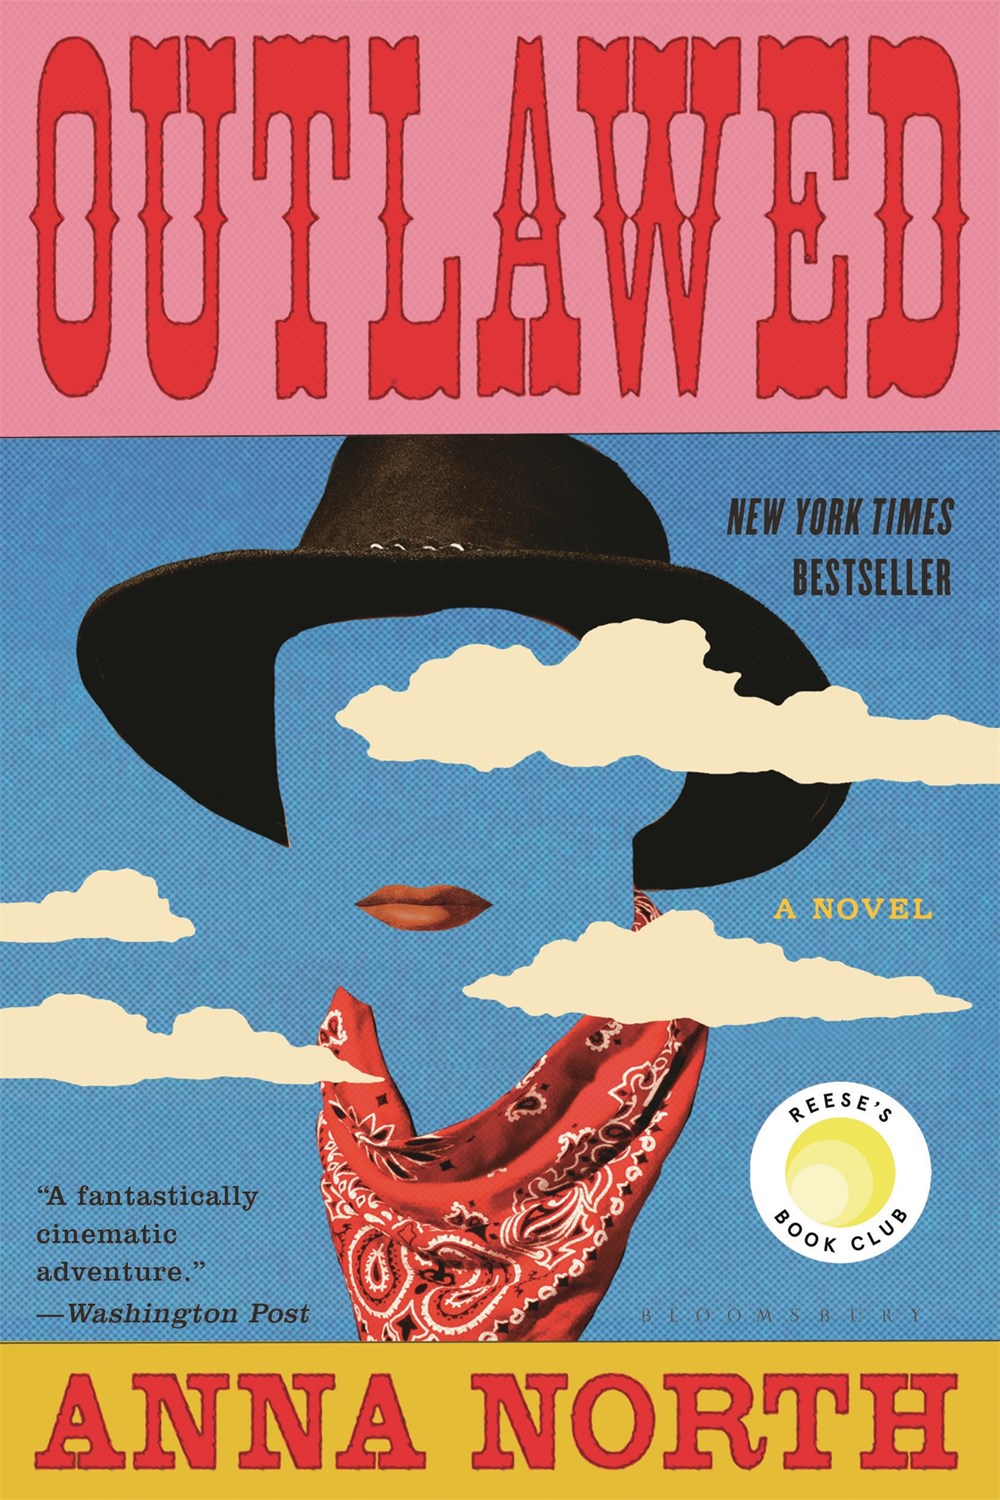 Outlawed: A Novel by Anna North